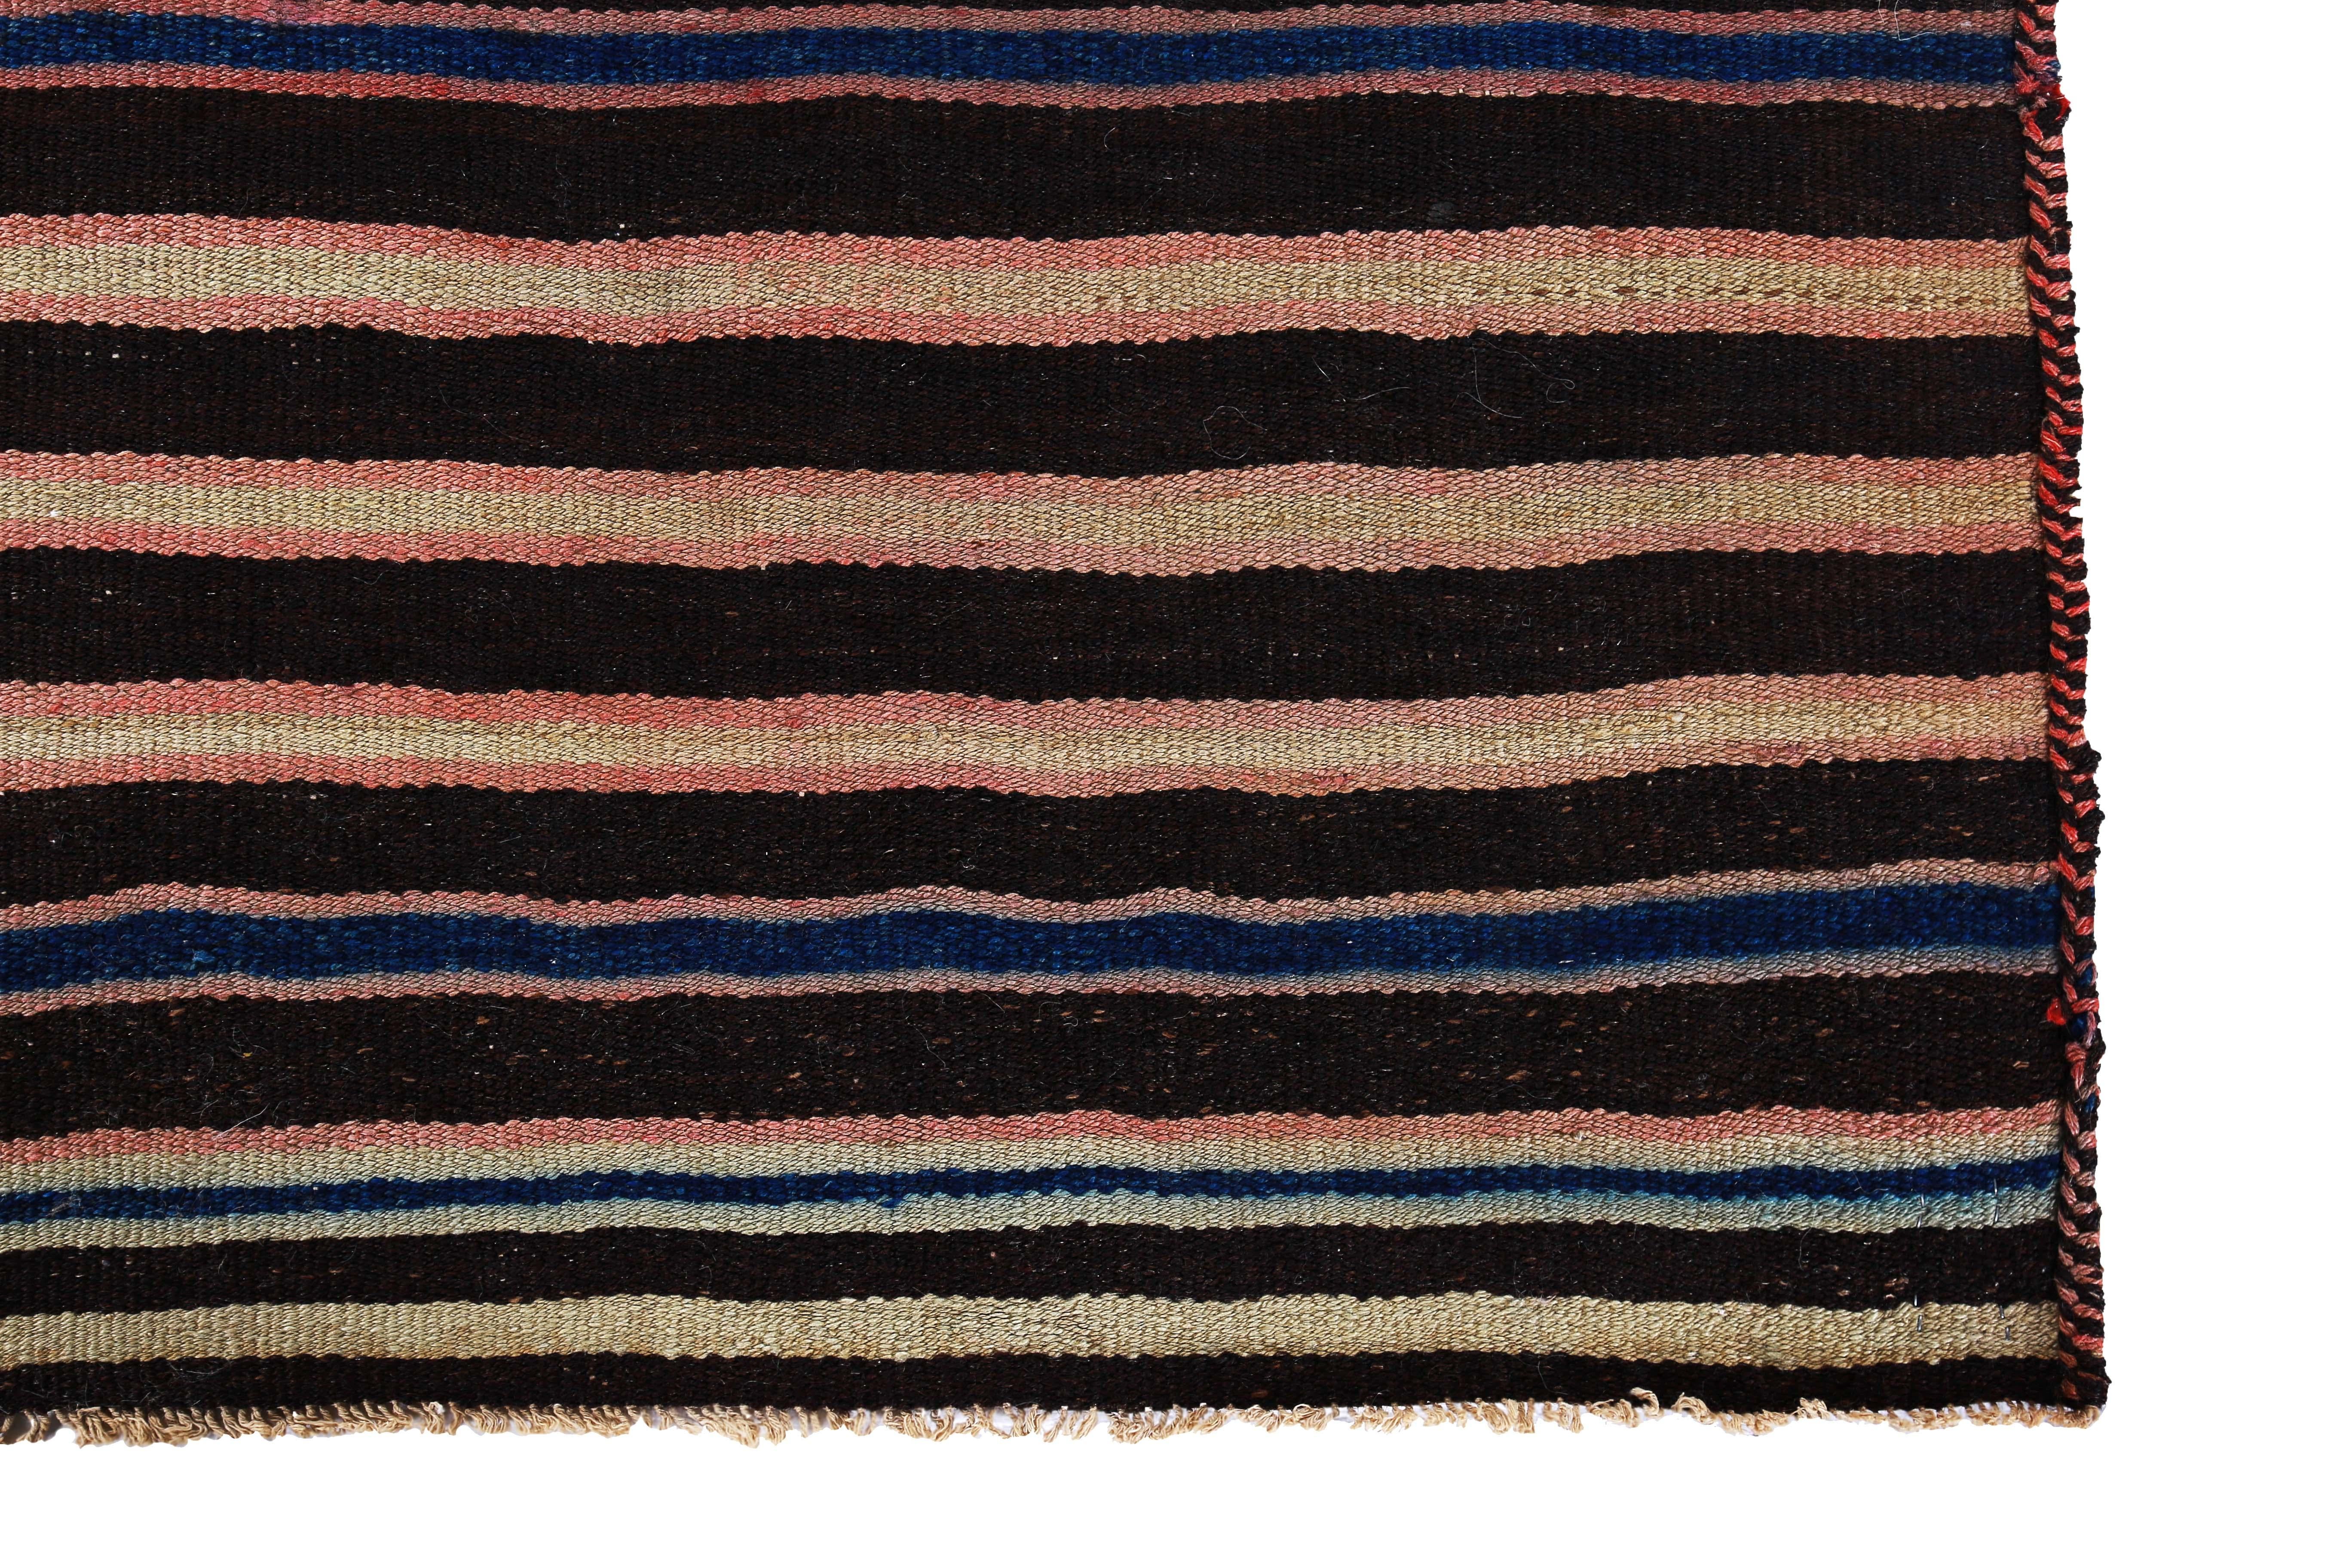 Modern Turkish Kilim Rug with Red, Beige and Blue Pencil Stripes In New Condition For Sale In Dallas, TX